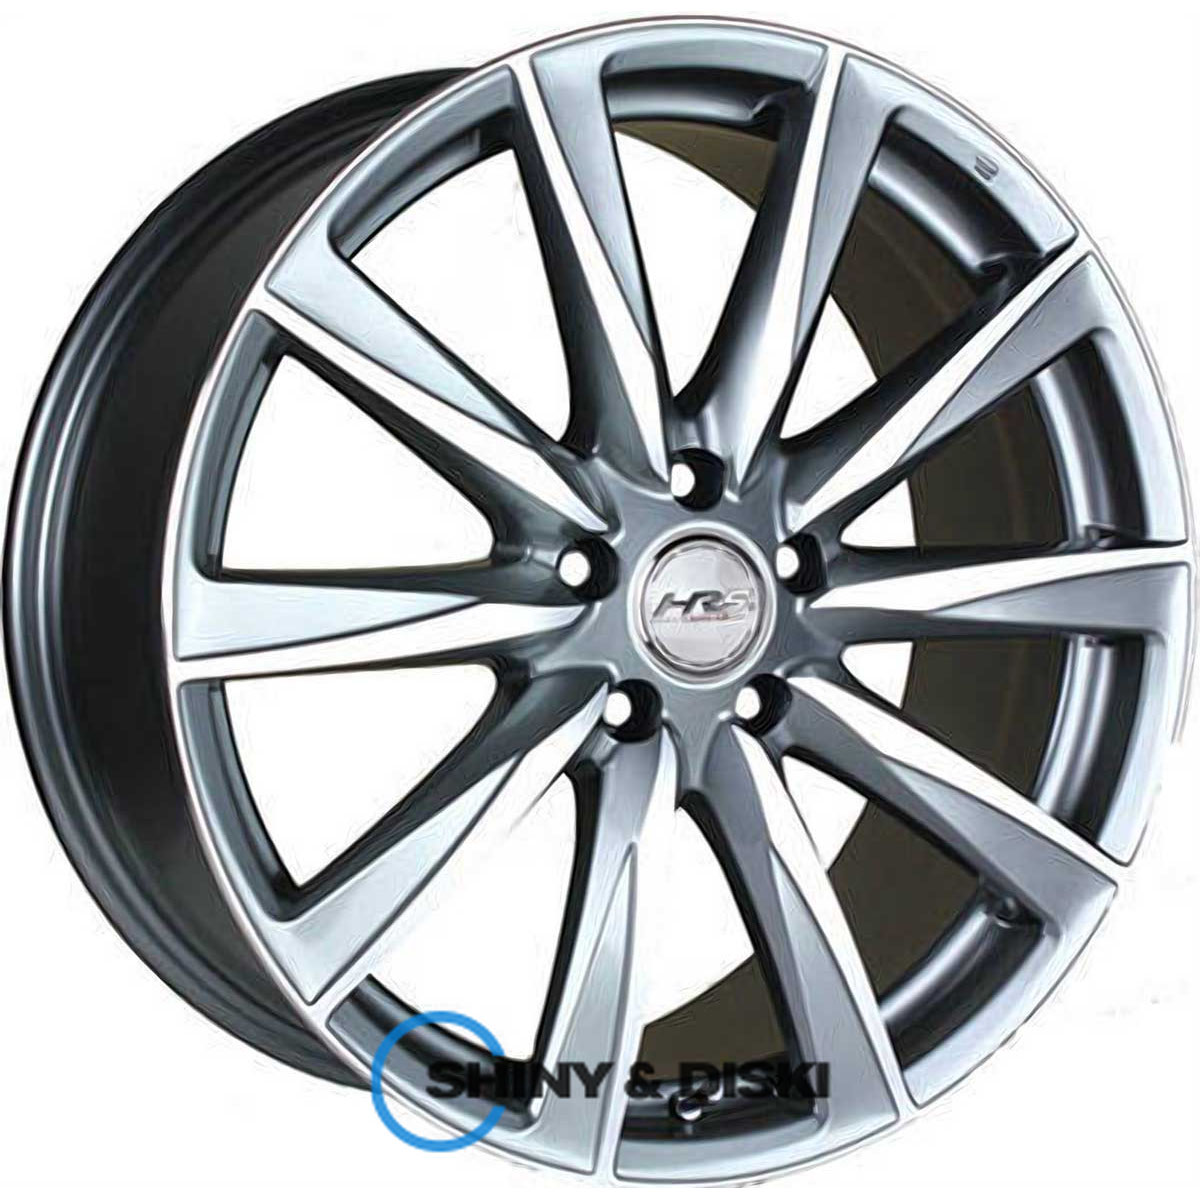 rs tuning h-513 ddnfp r19 w8 pcd5x114.3 et35 dia60.1